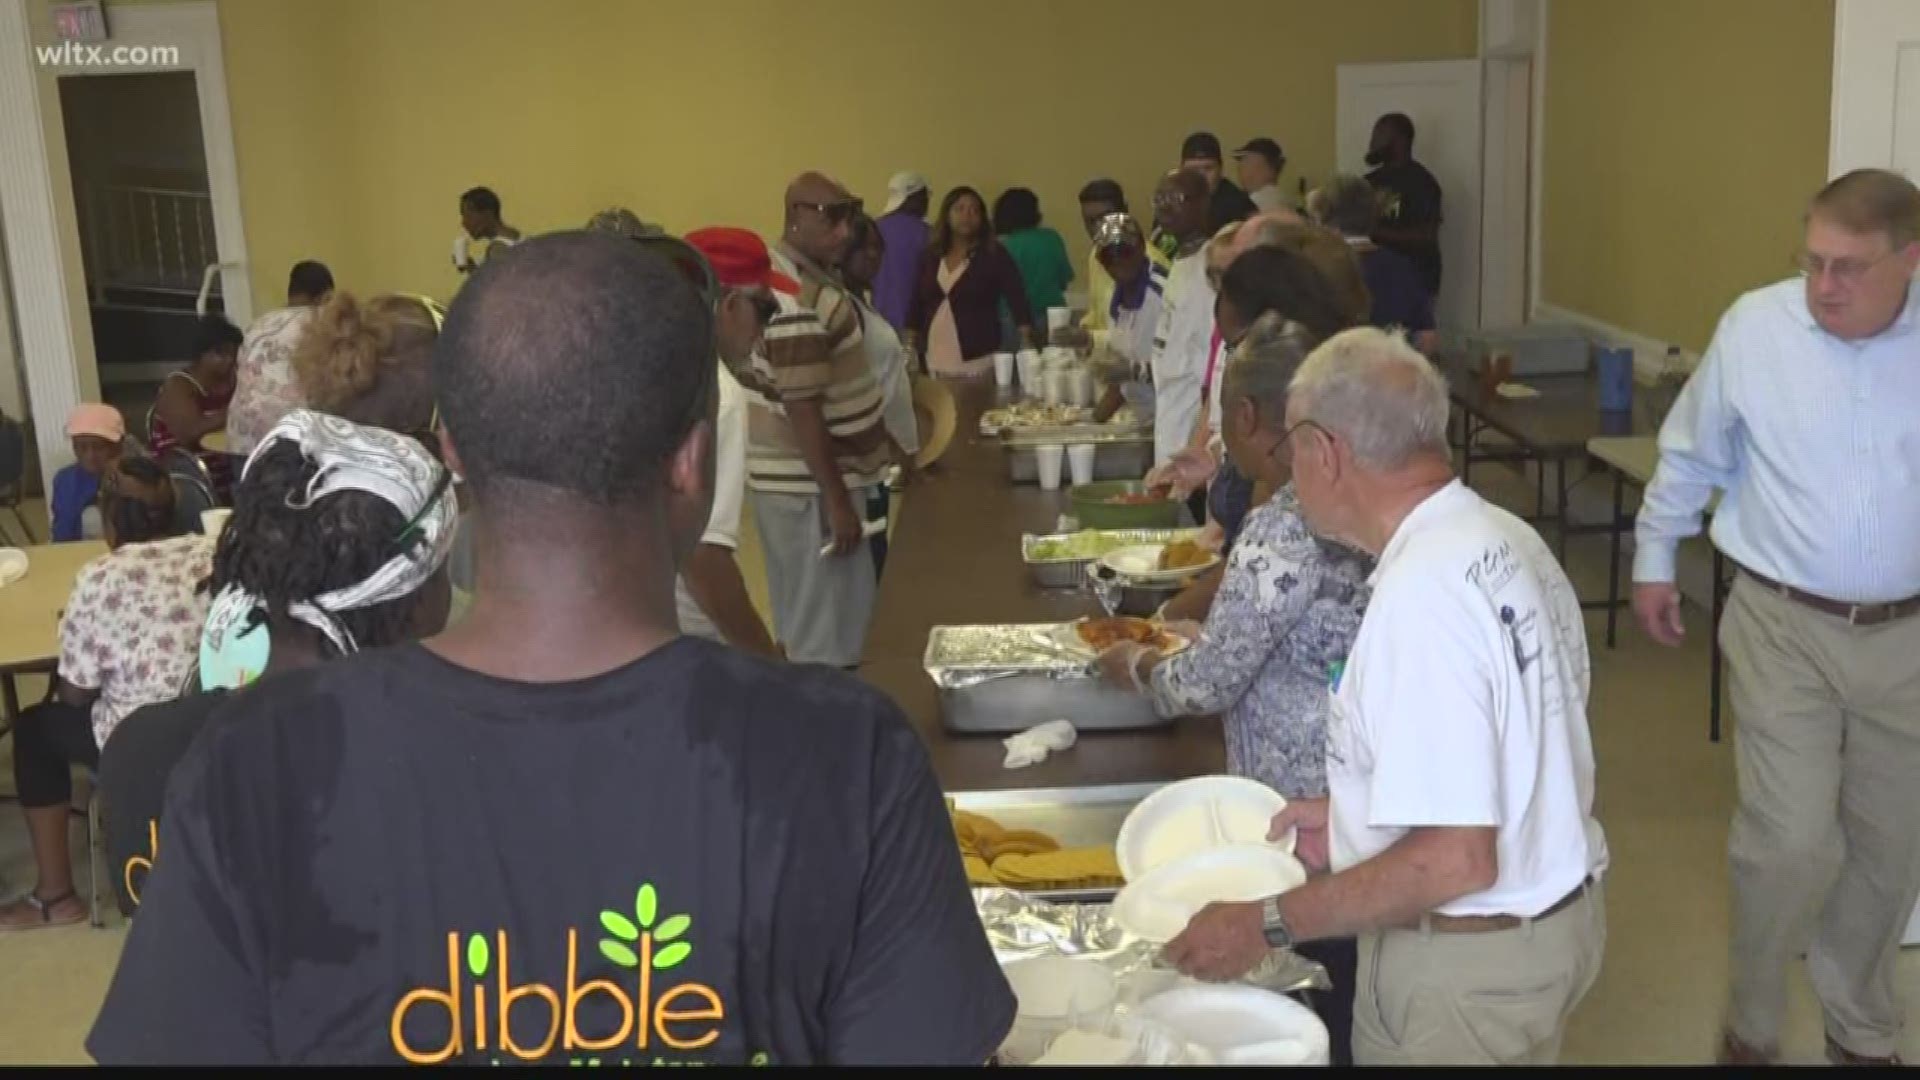 The First Baptist church in Orangeburg serves about 160-180 people every Thursday at 1pm.